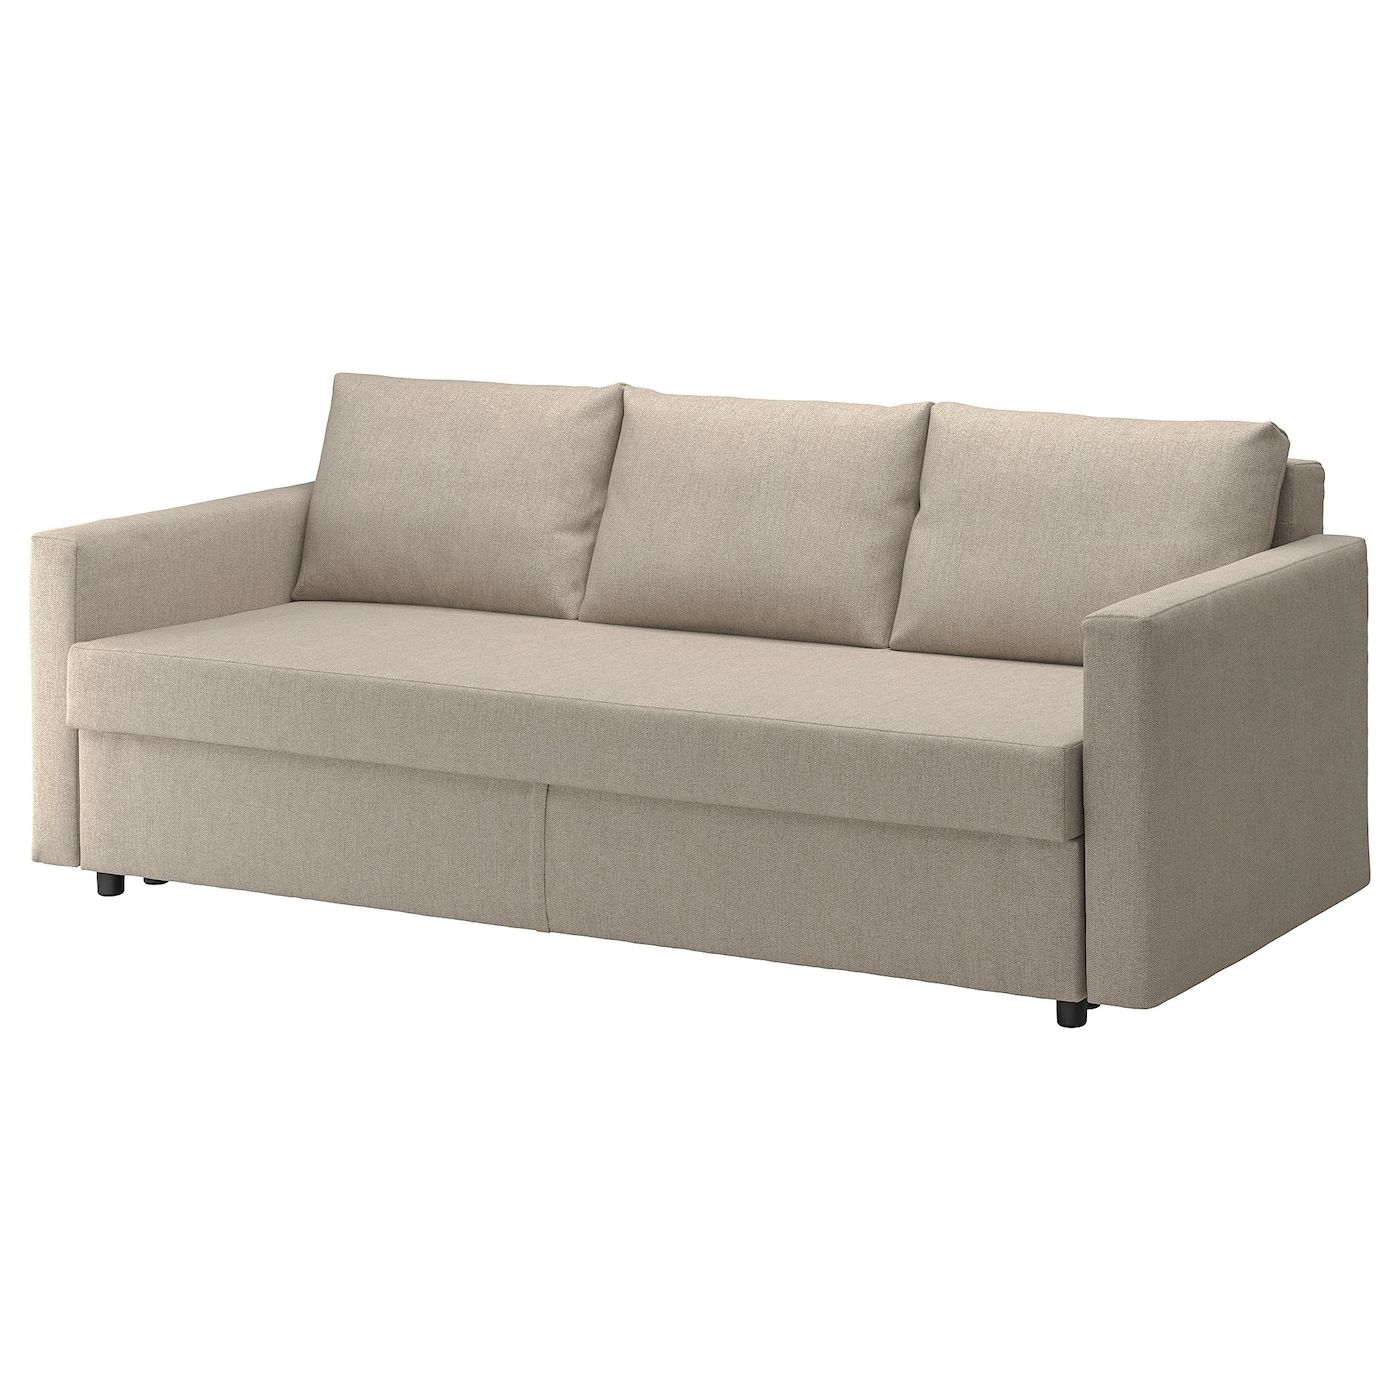 Large sofa bed and its benefits